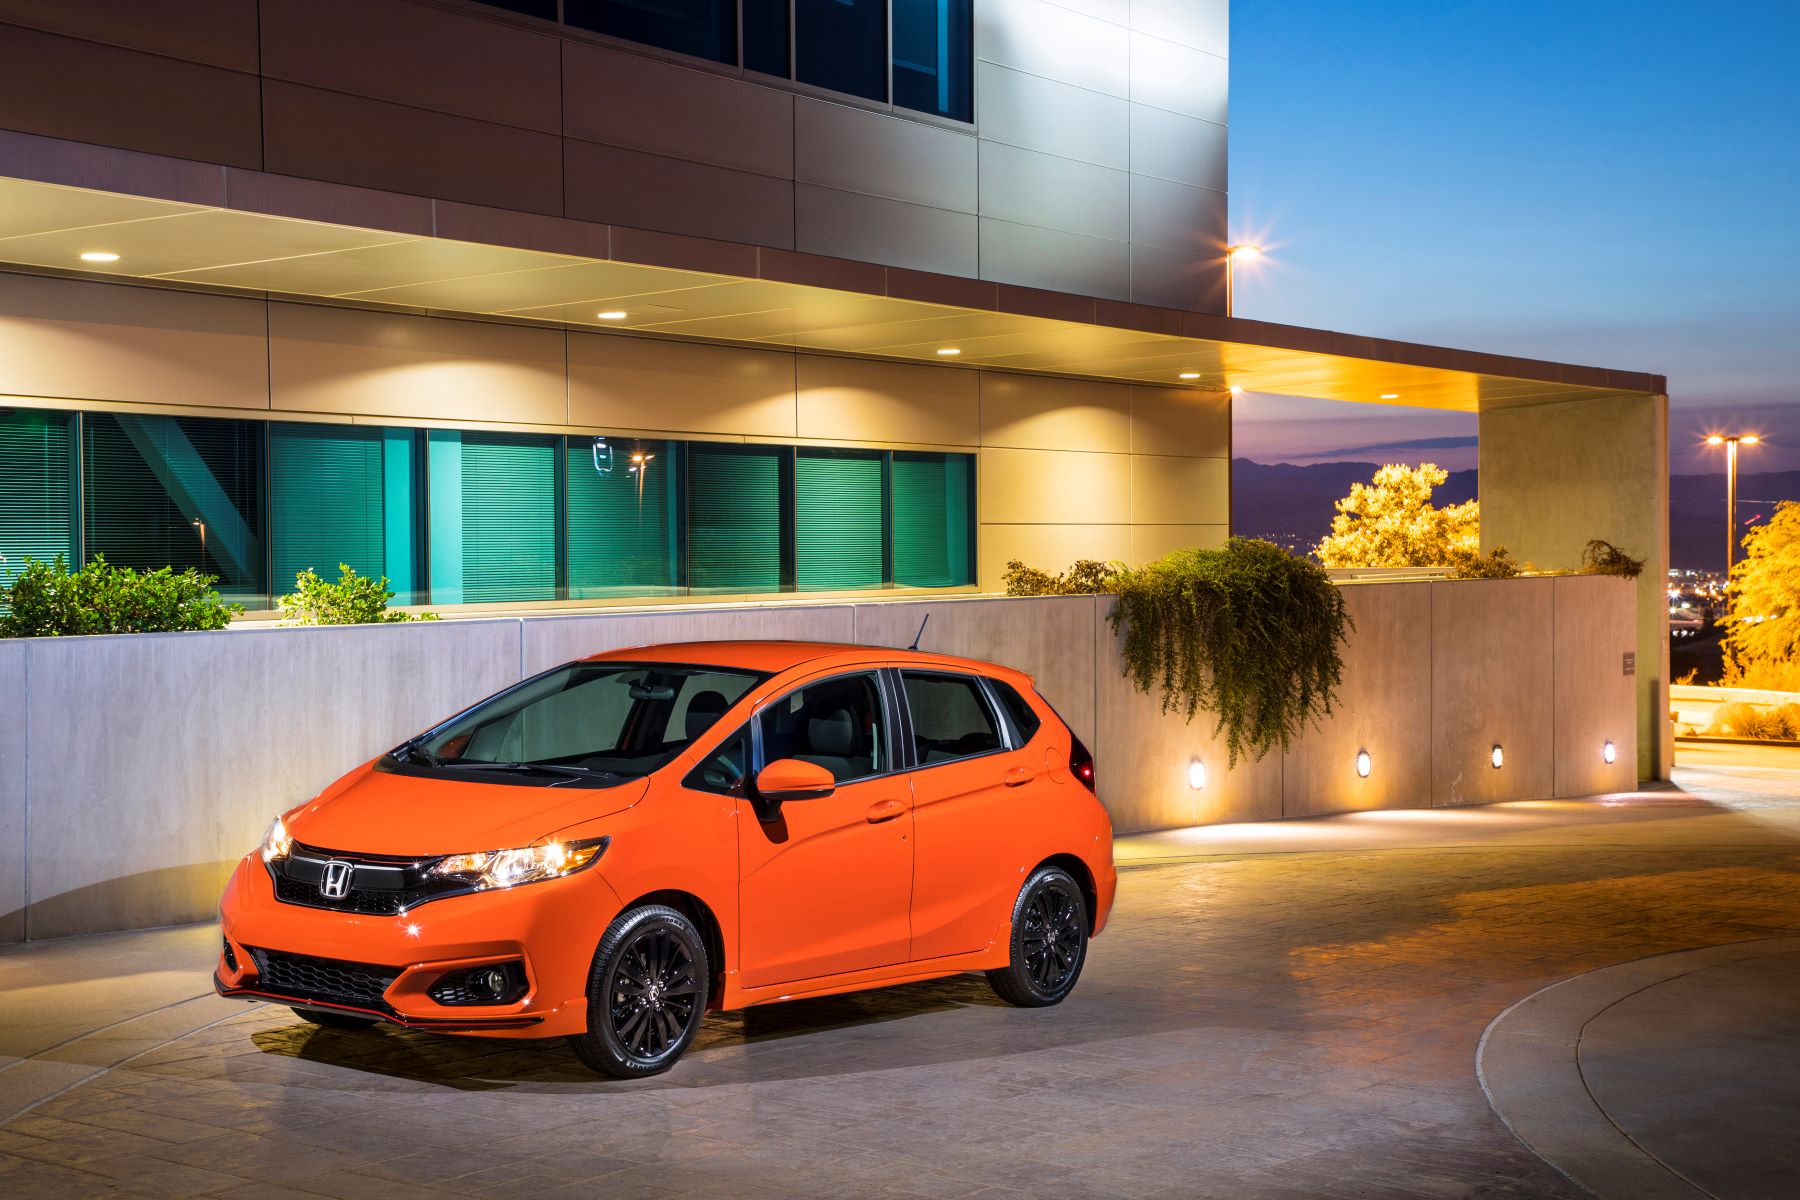 An orange 2018 Honda Fit subcompact hatchback model parked on a stone driveway outside an office building at sunset